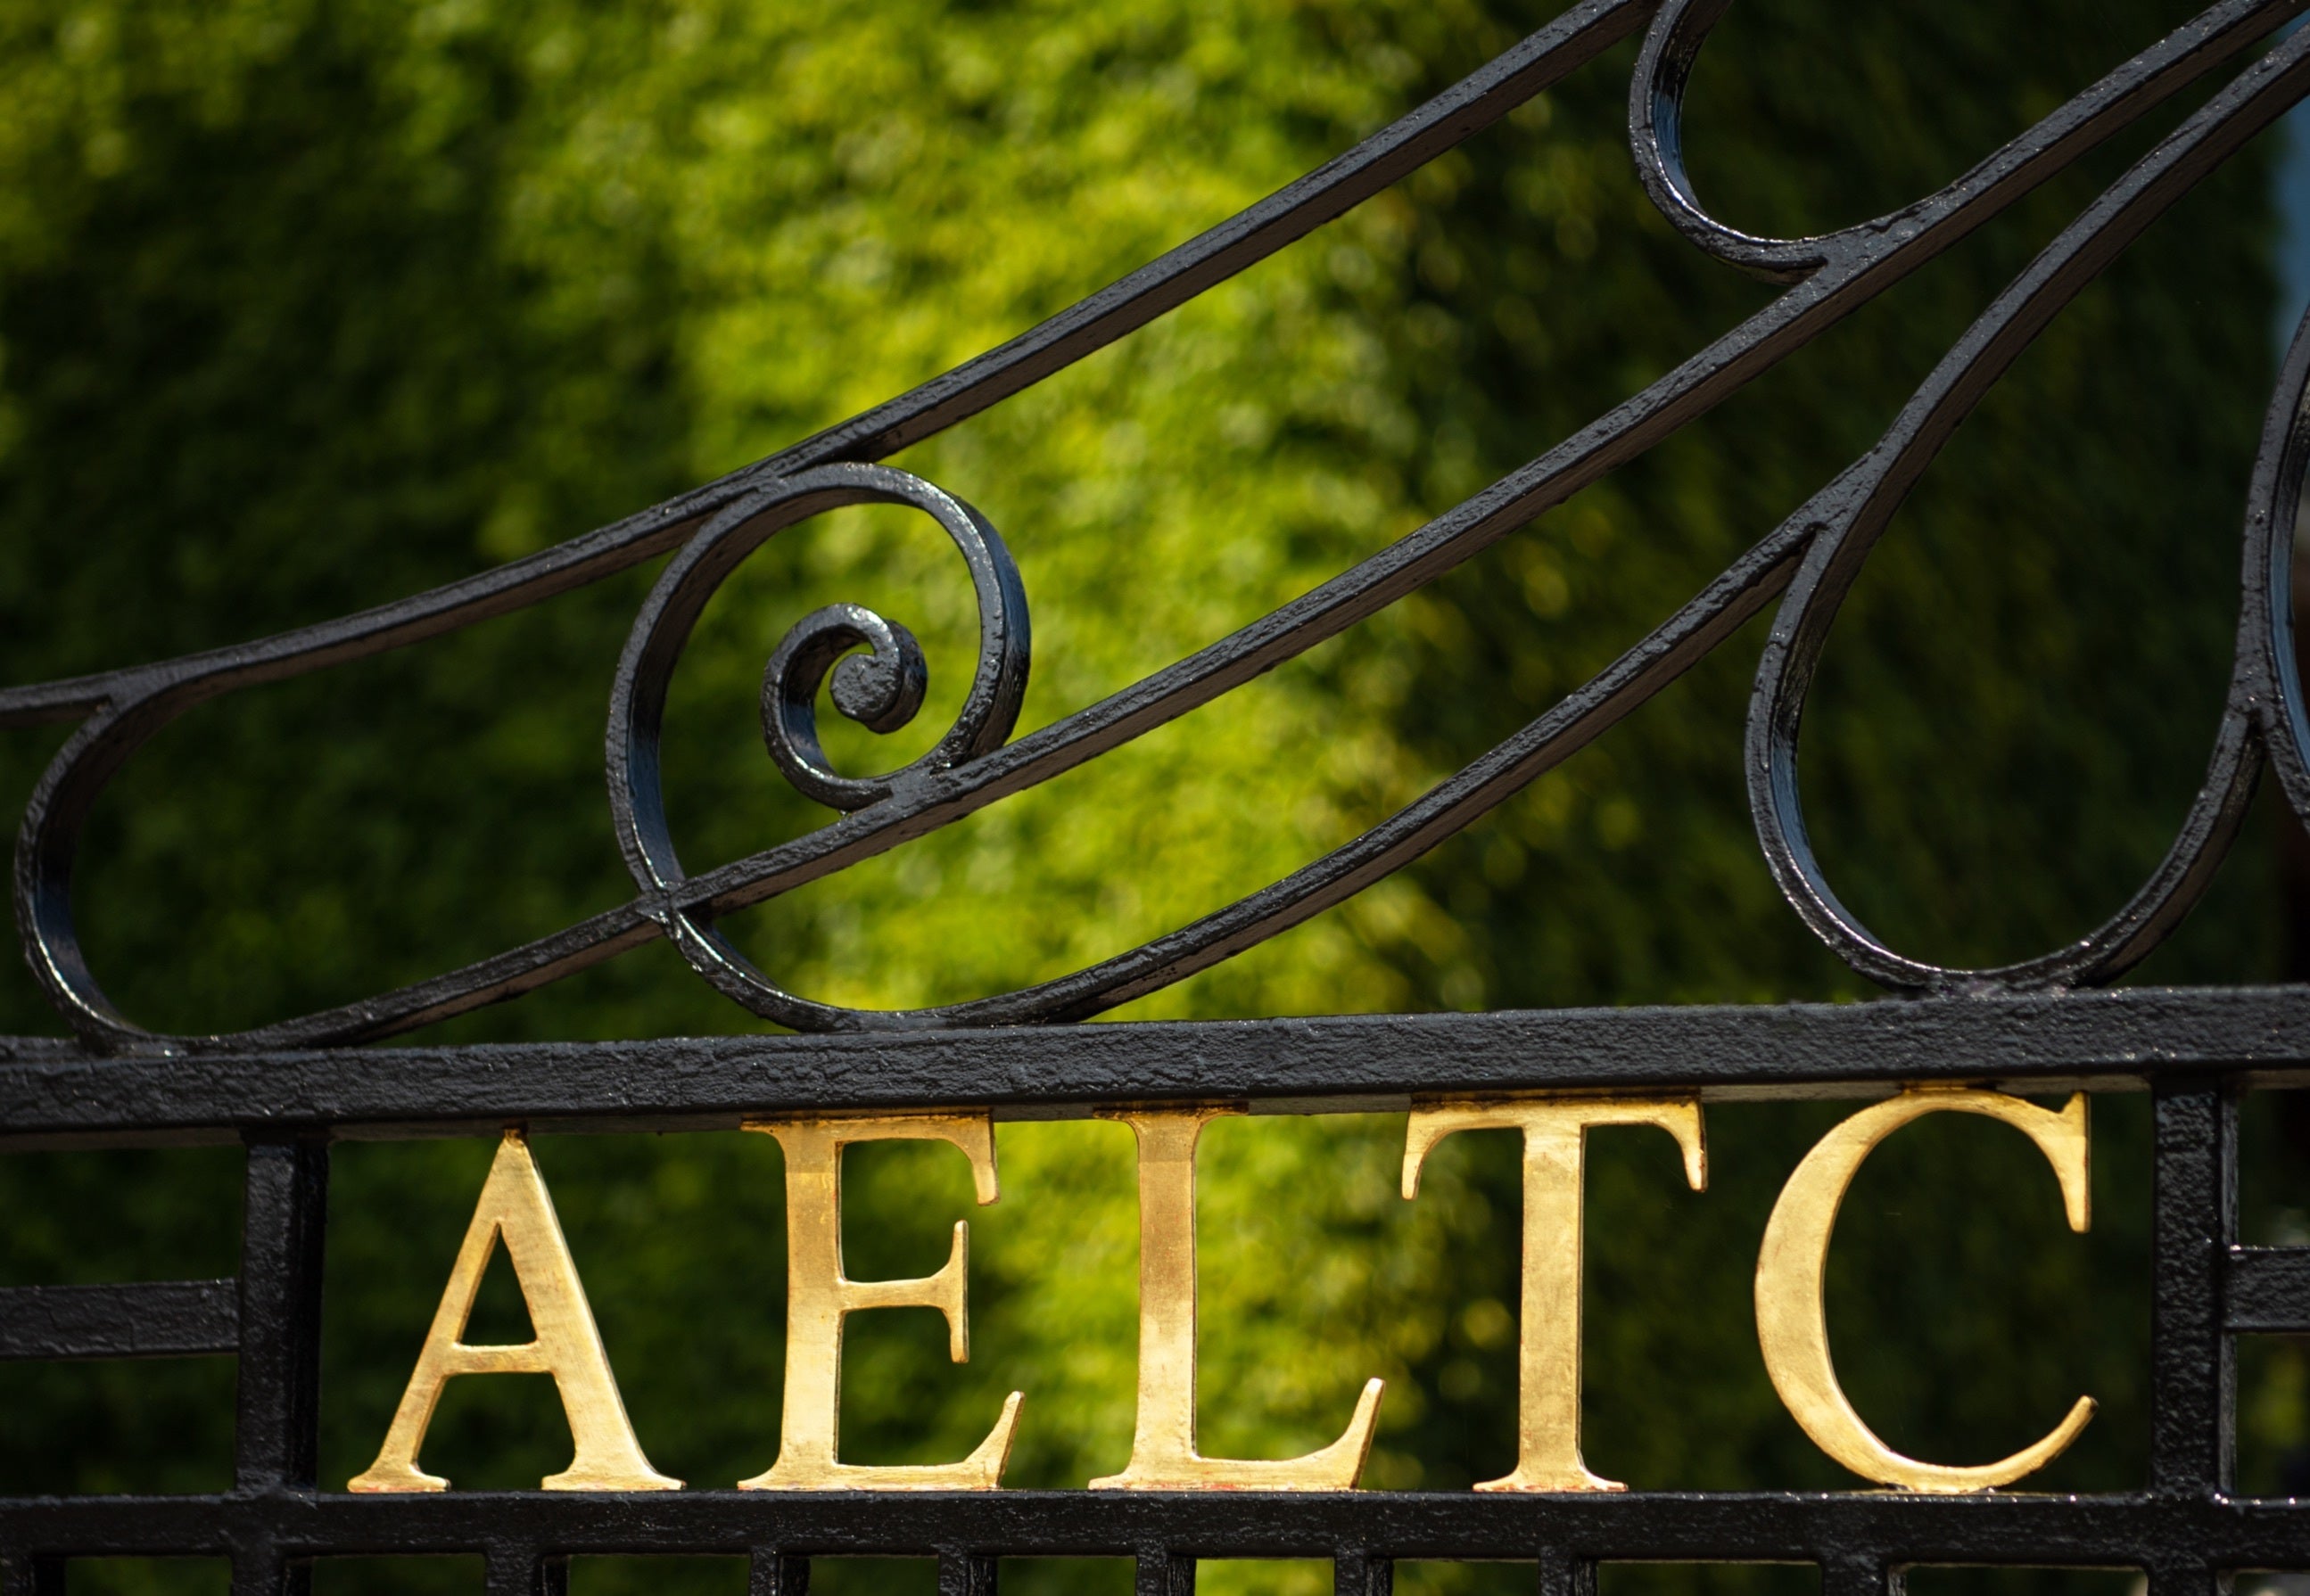 Entrance to the AELTC Headquarters